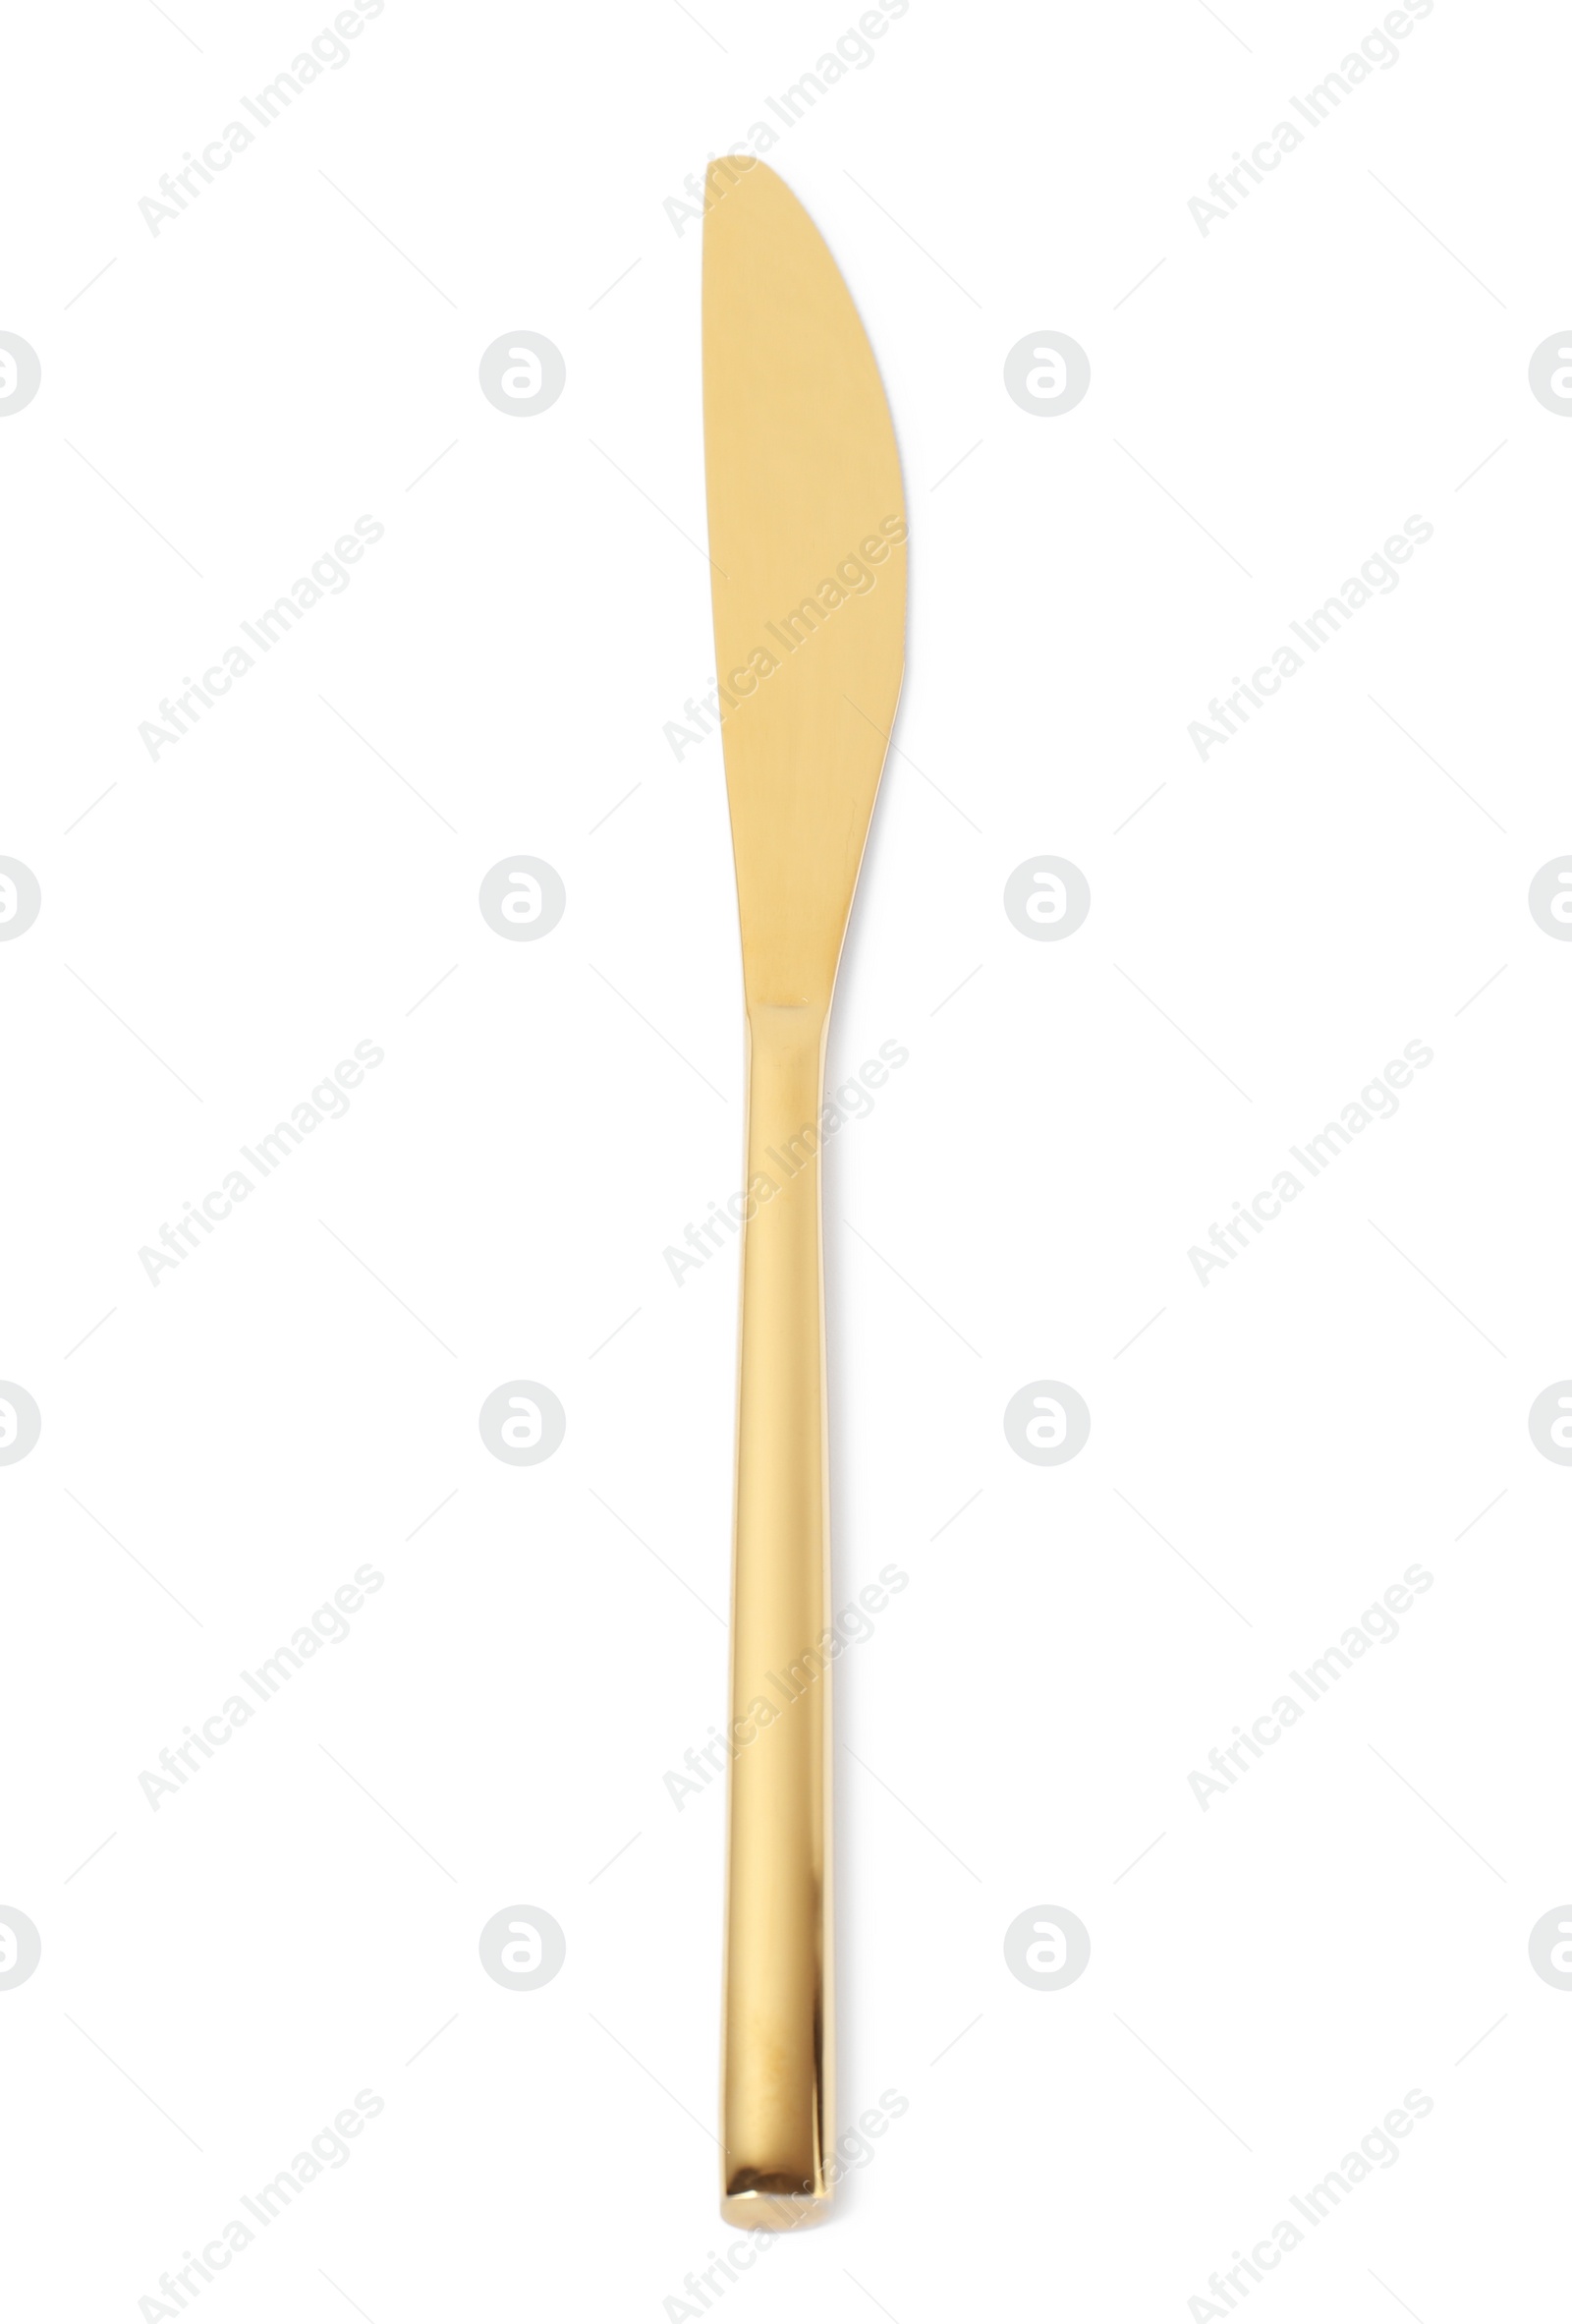 Photo of Stylish clean gold knife on white background, top view